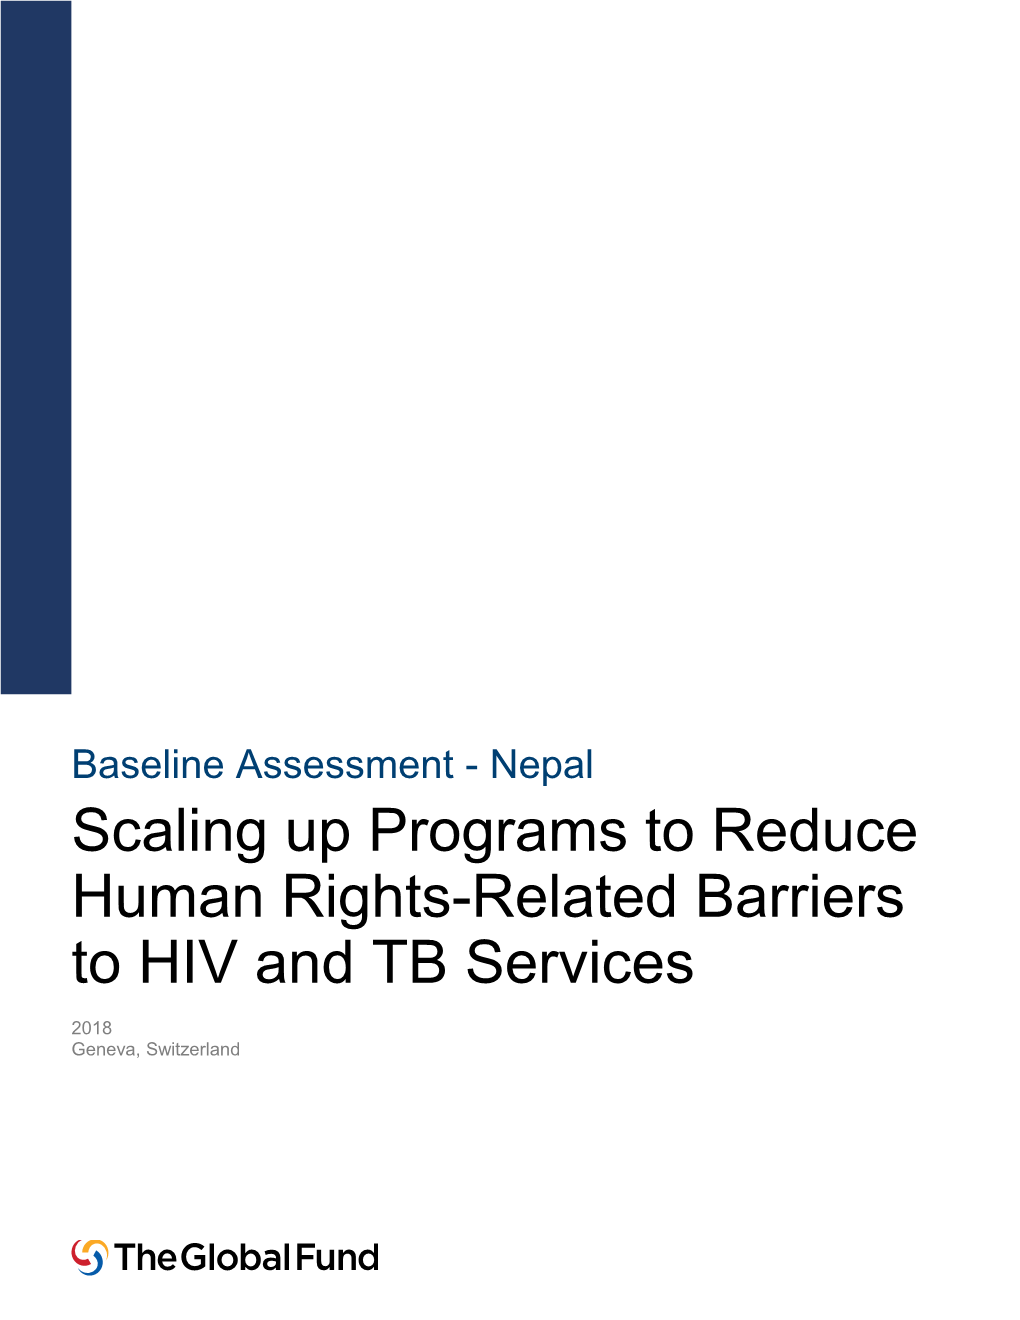 Scaling up Programs to Reduce Human Rights-Related Barriers to HIV and TB Services